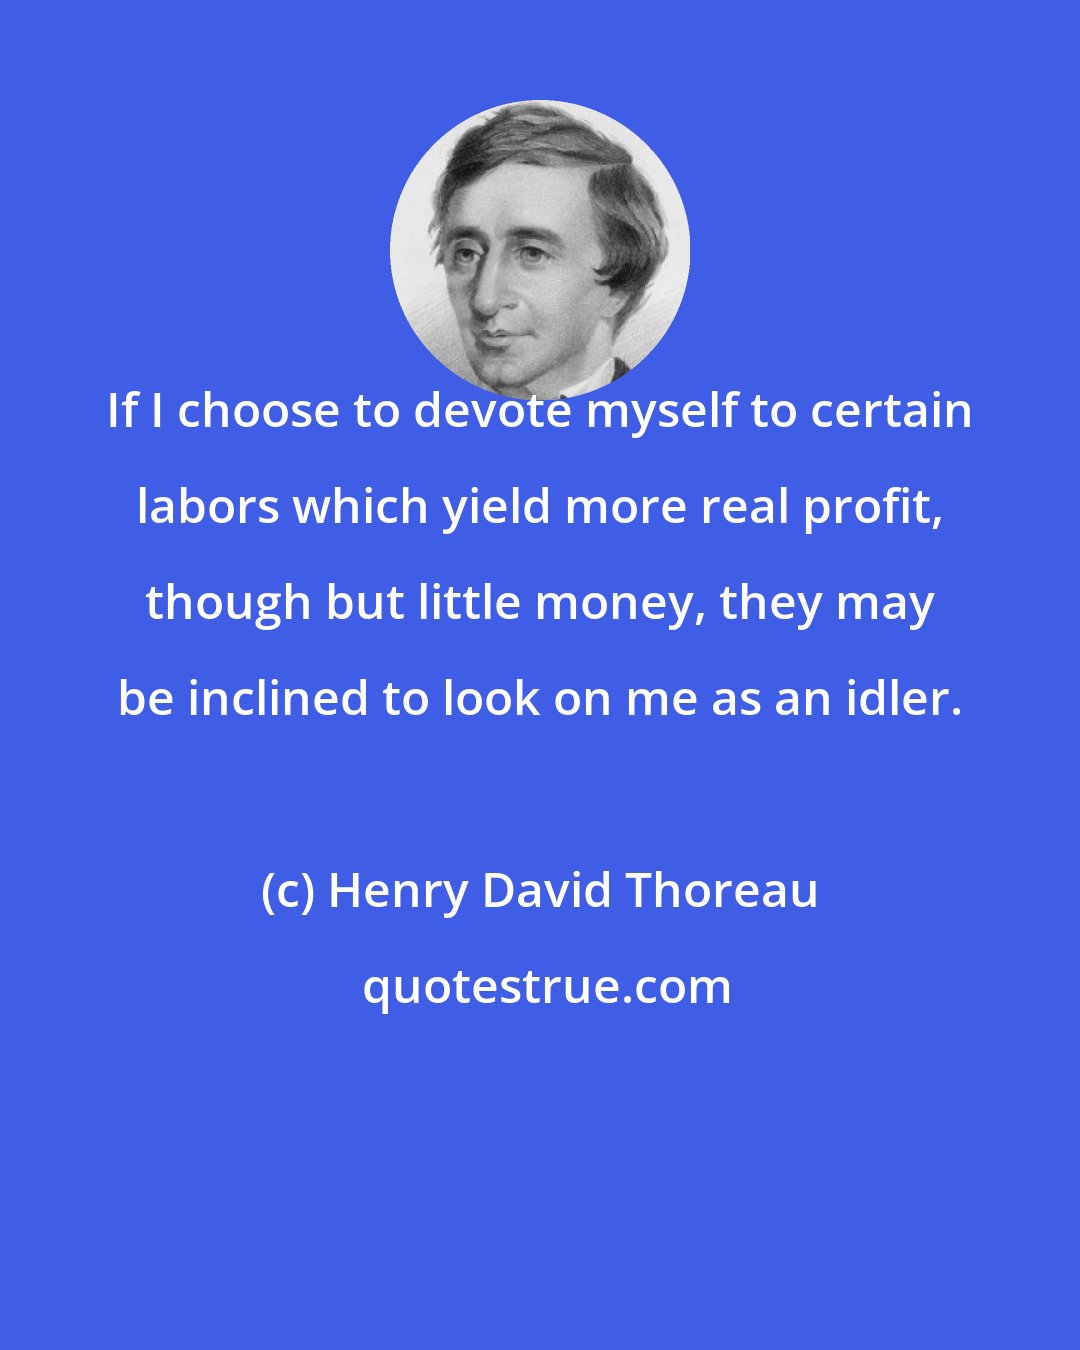 Henry David Thoreau: If I choose to devote myself to certain labors which yield more real profit, though but little money, they may be inclined to look on me as an idler.